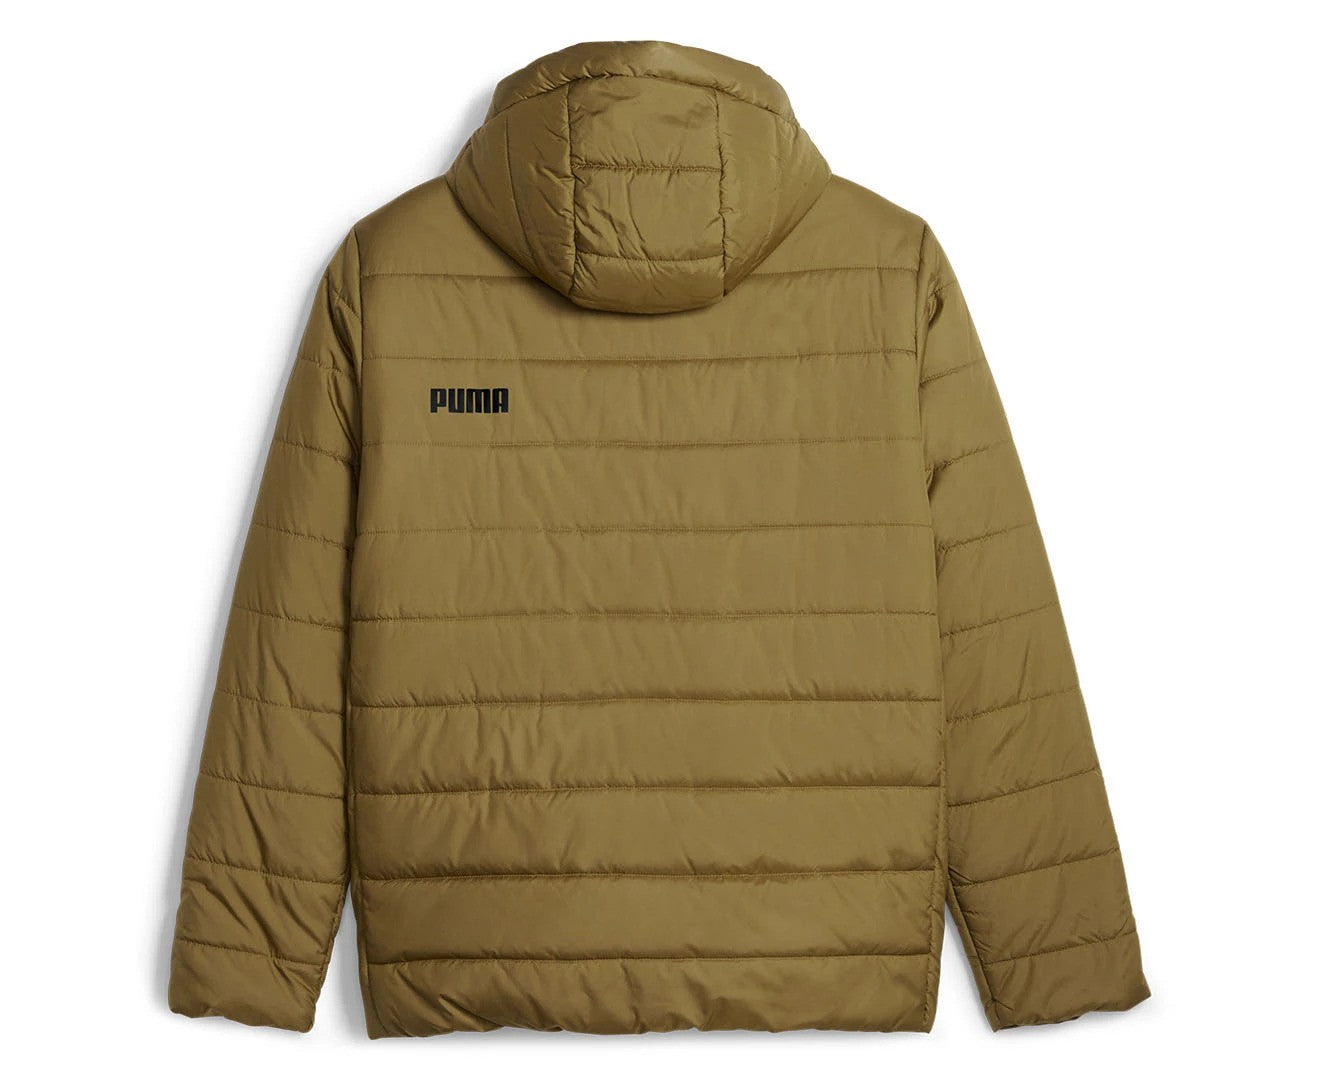 Puma Men's Essentials Hooded Padded Jacket - Chocolate Chip